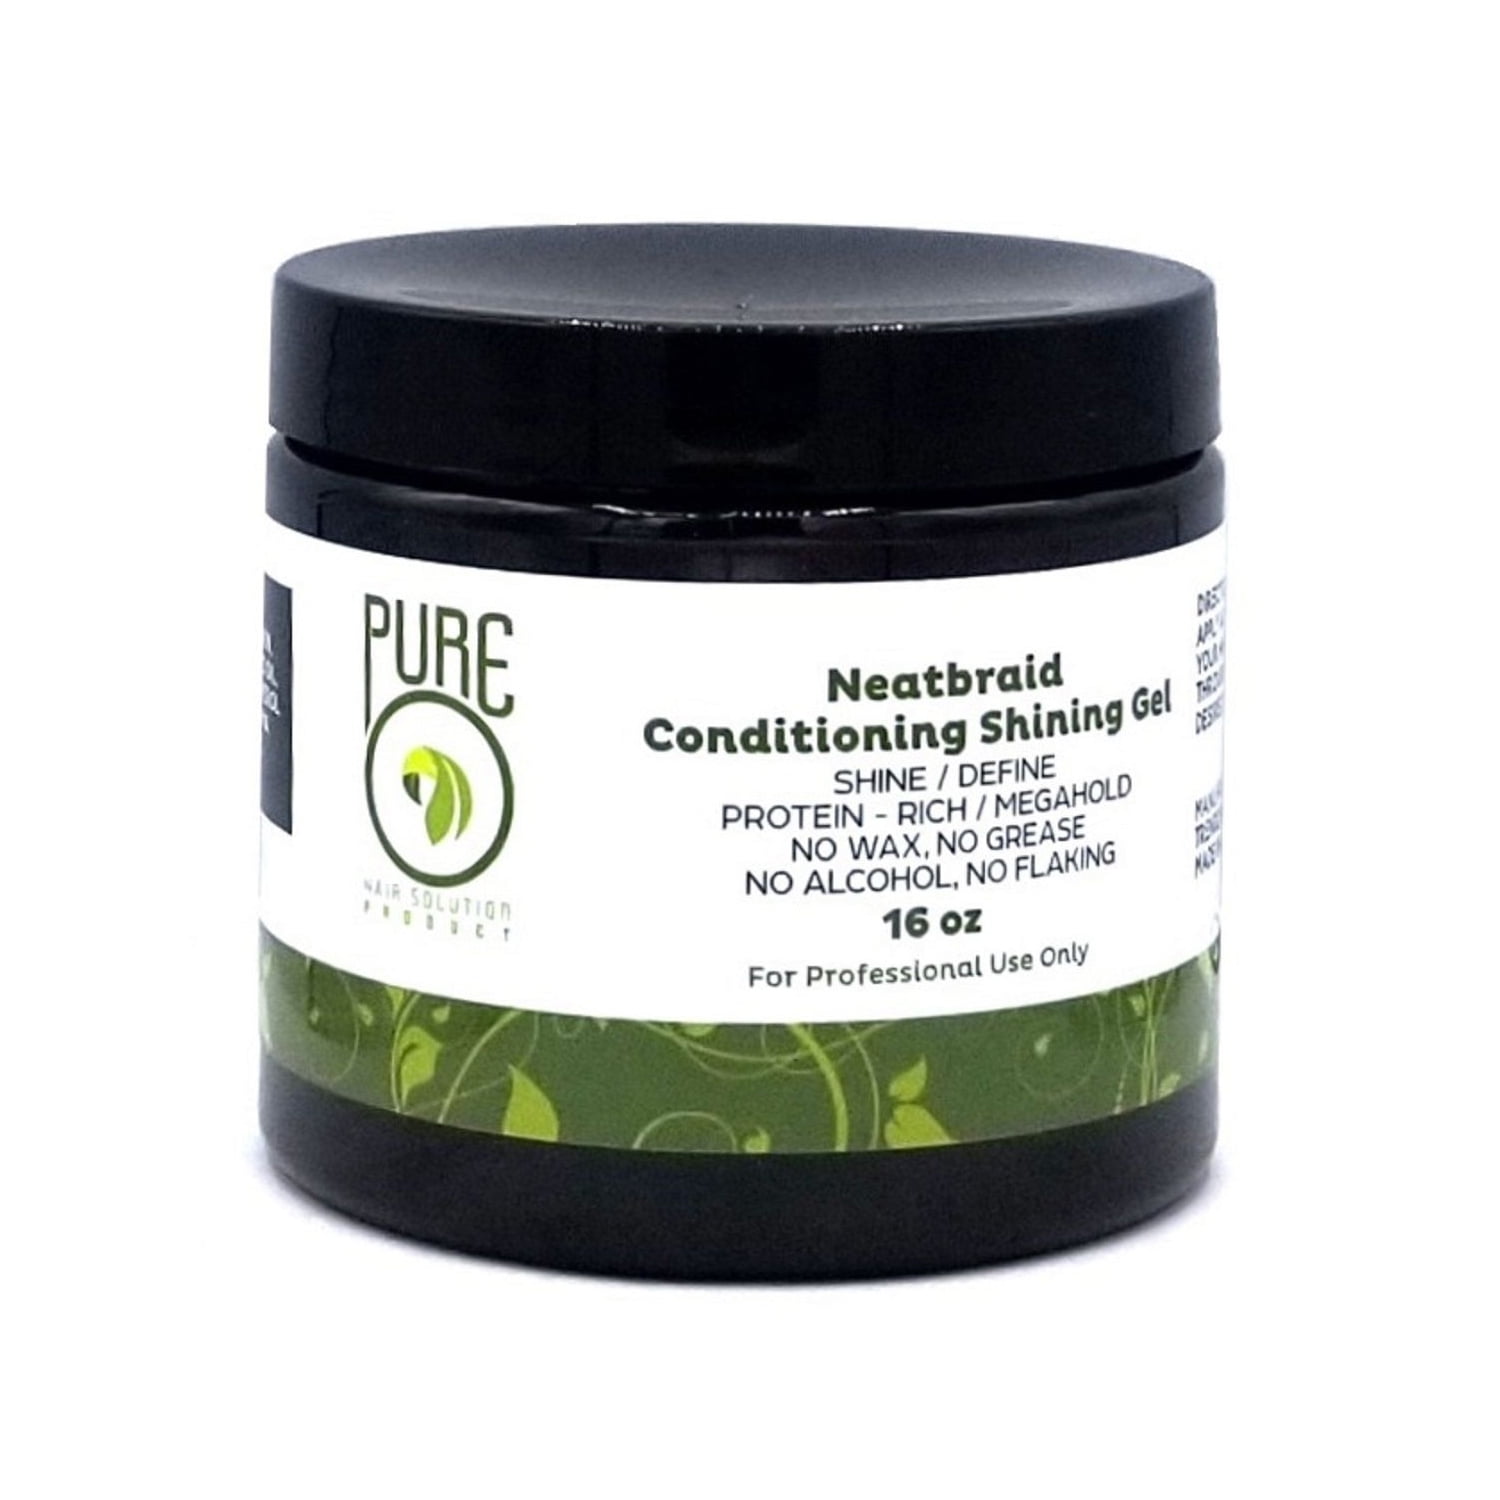 Pure O Natural Neat Braid Conditioning Shining Gel, 16 Oz.